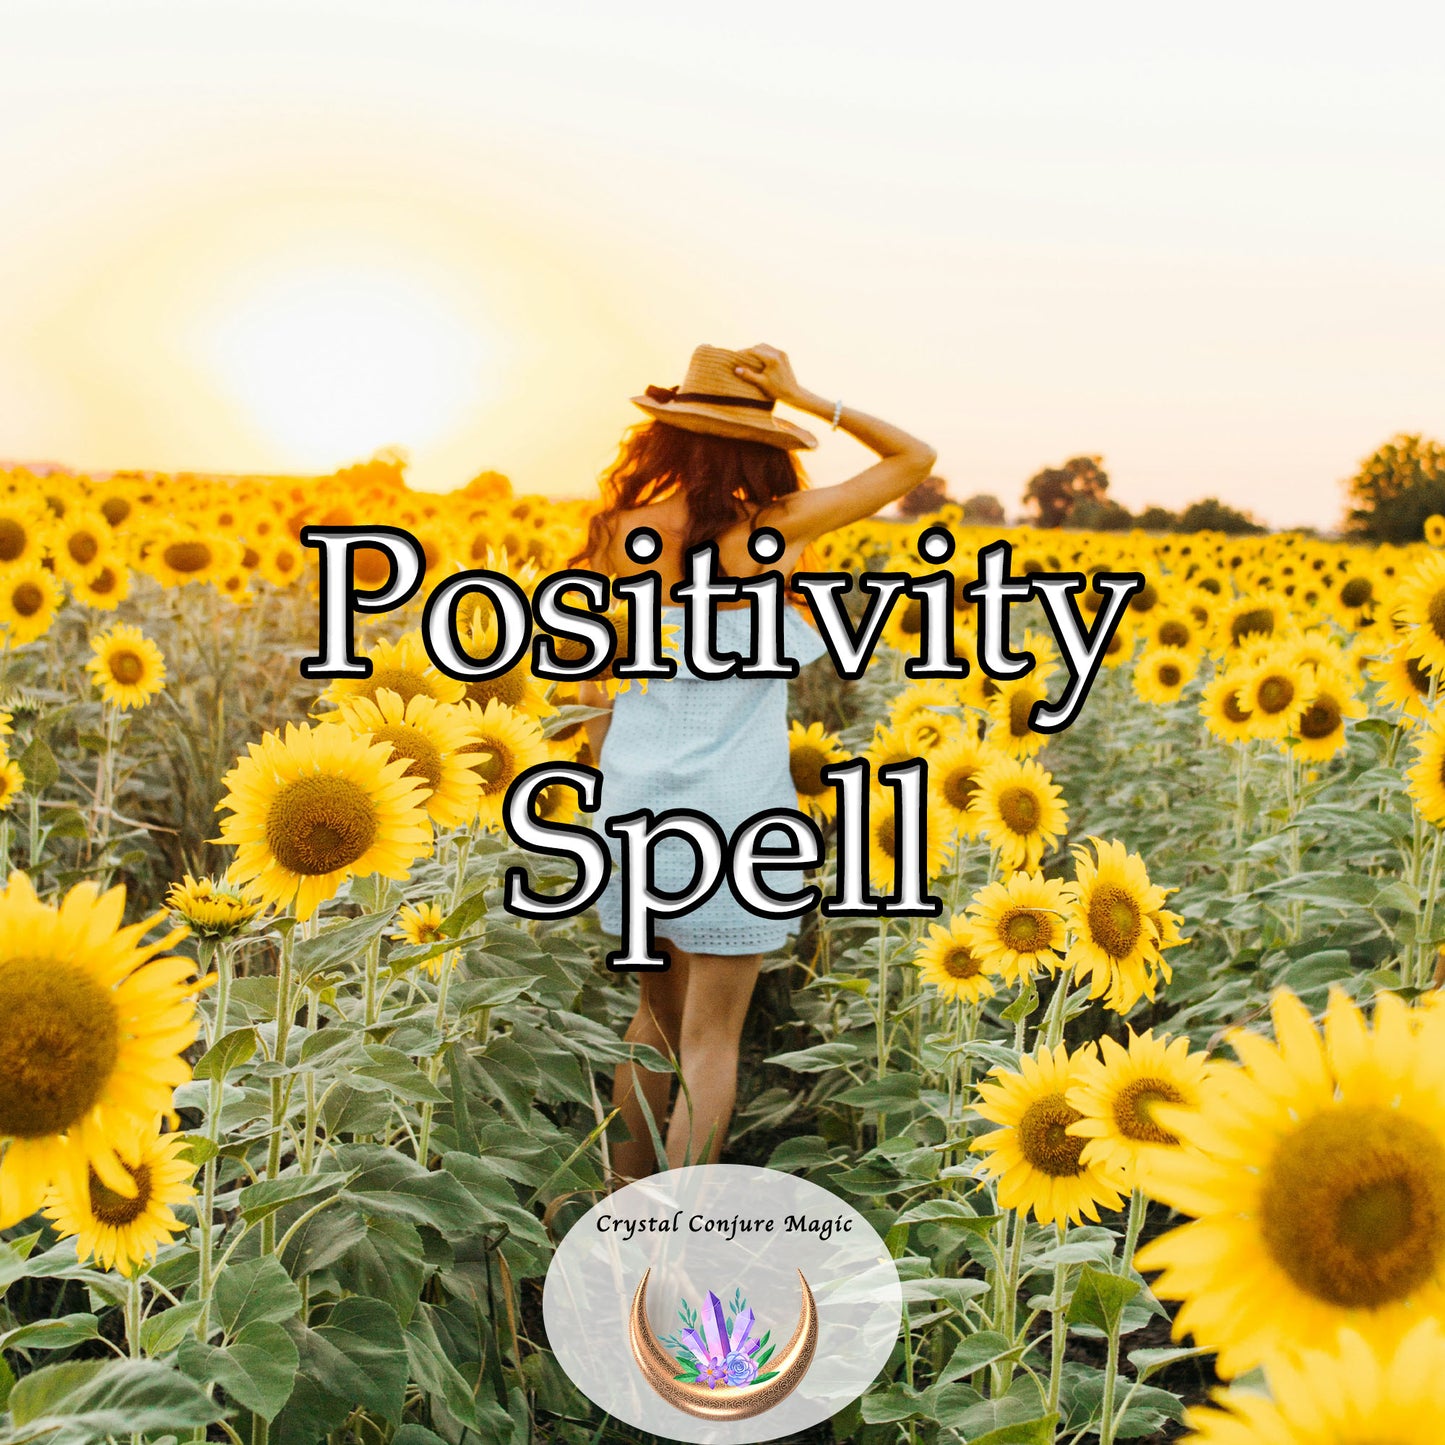 Positivity Spell - cultivate a more positive mindset and outlook on life